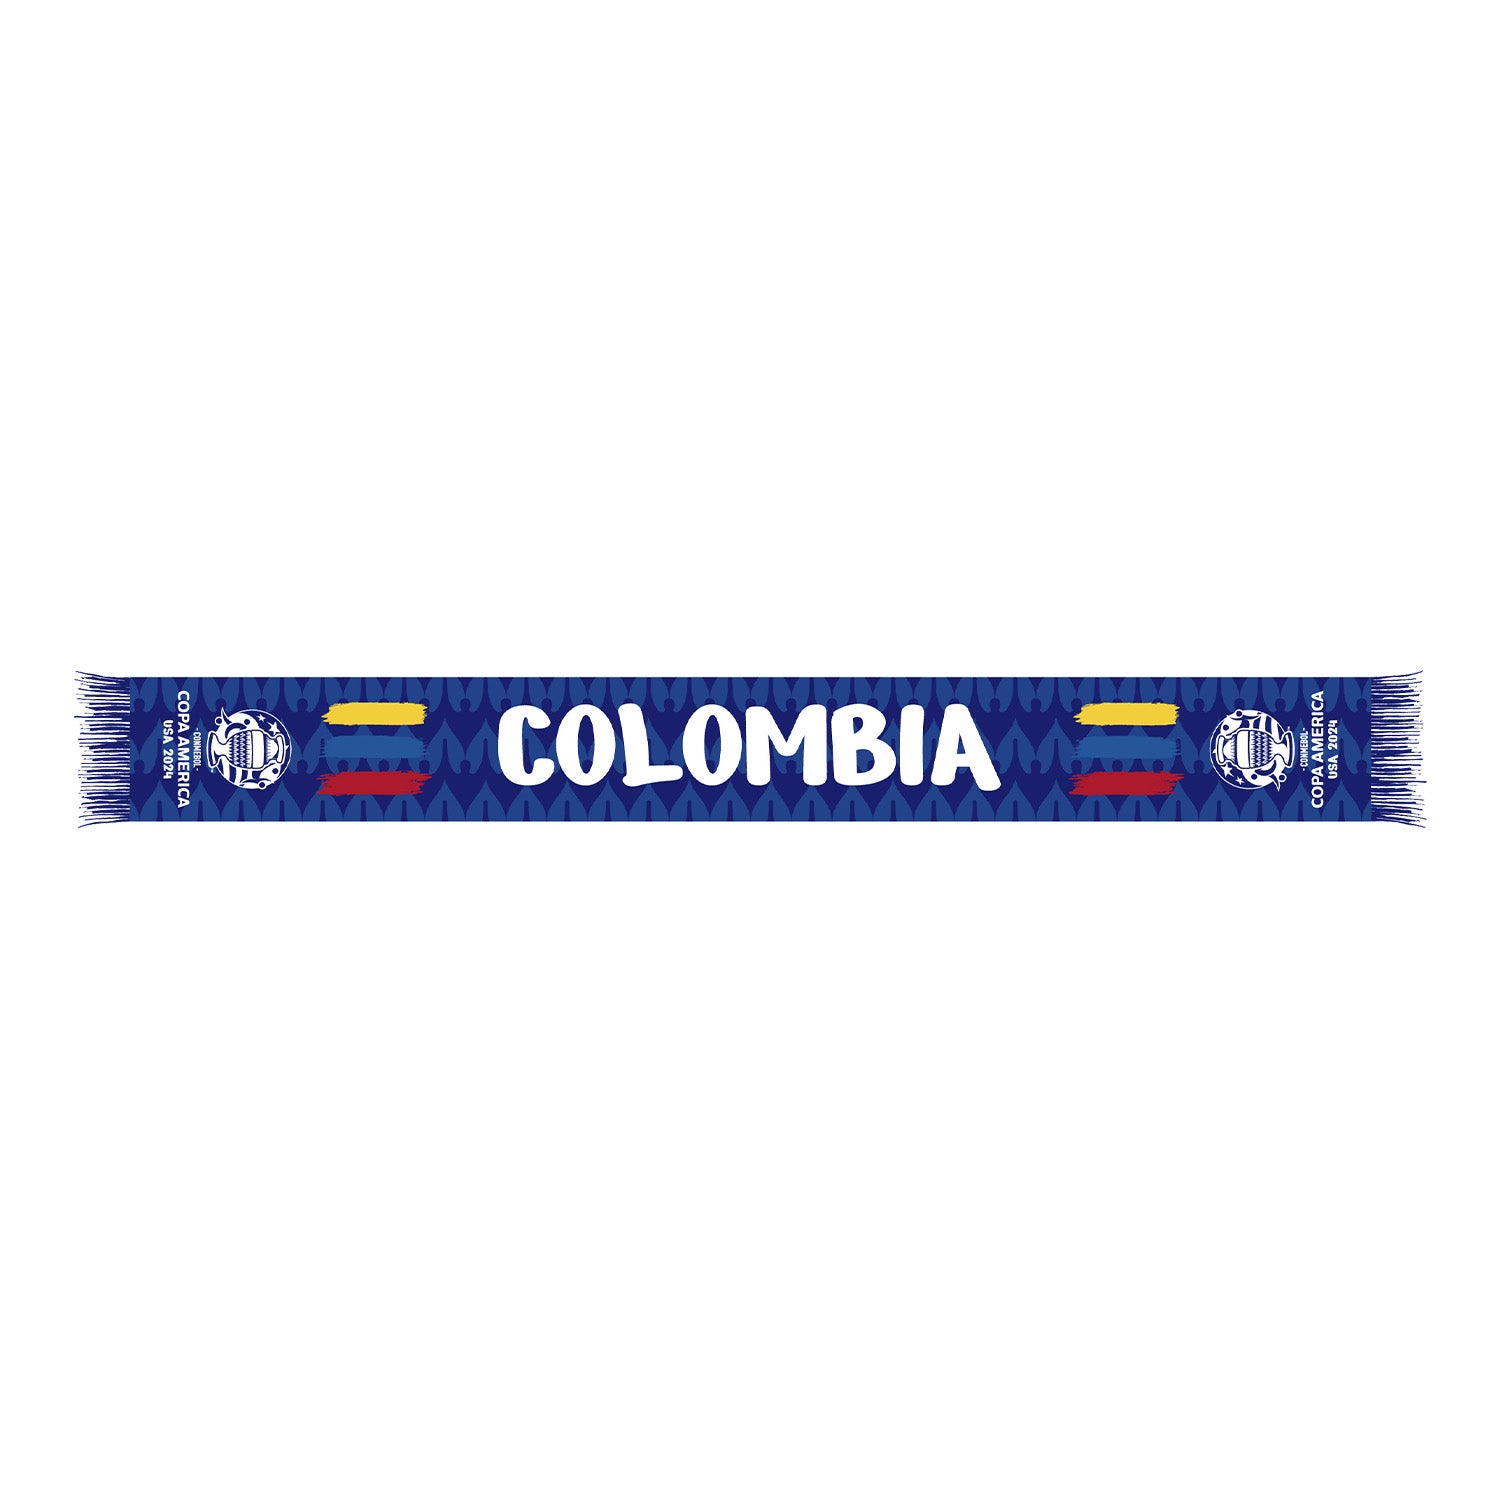 Colombia COPA America Scarf - Back View